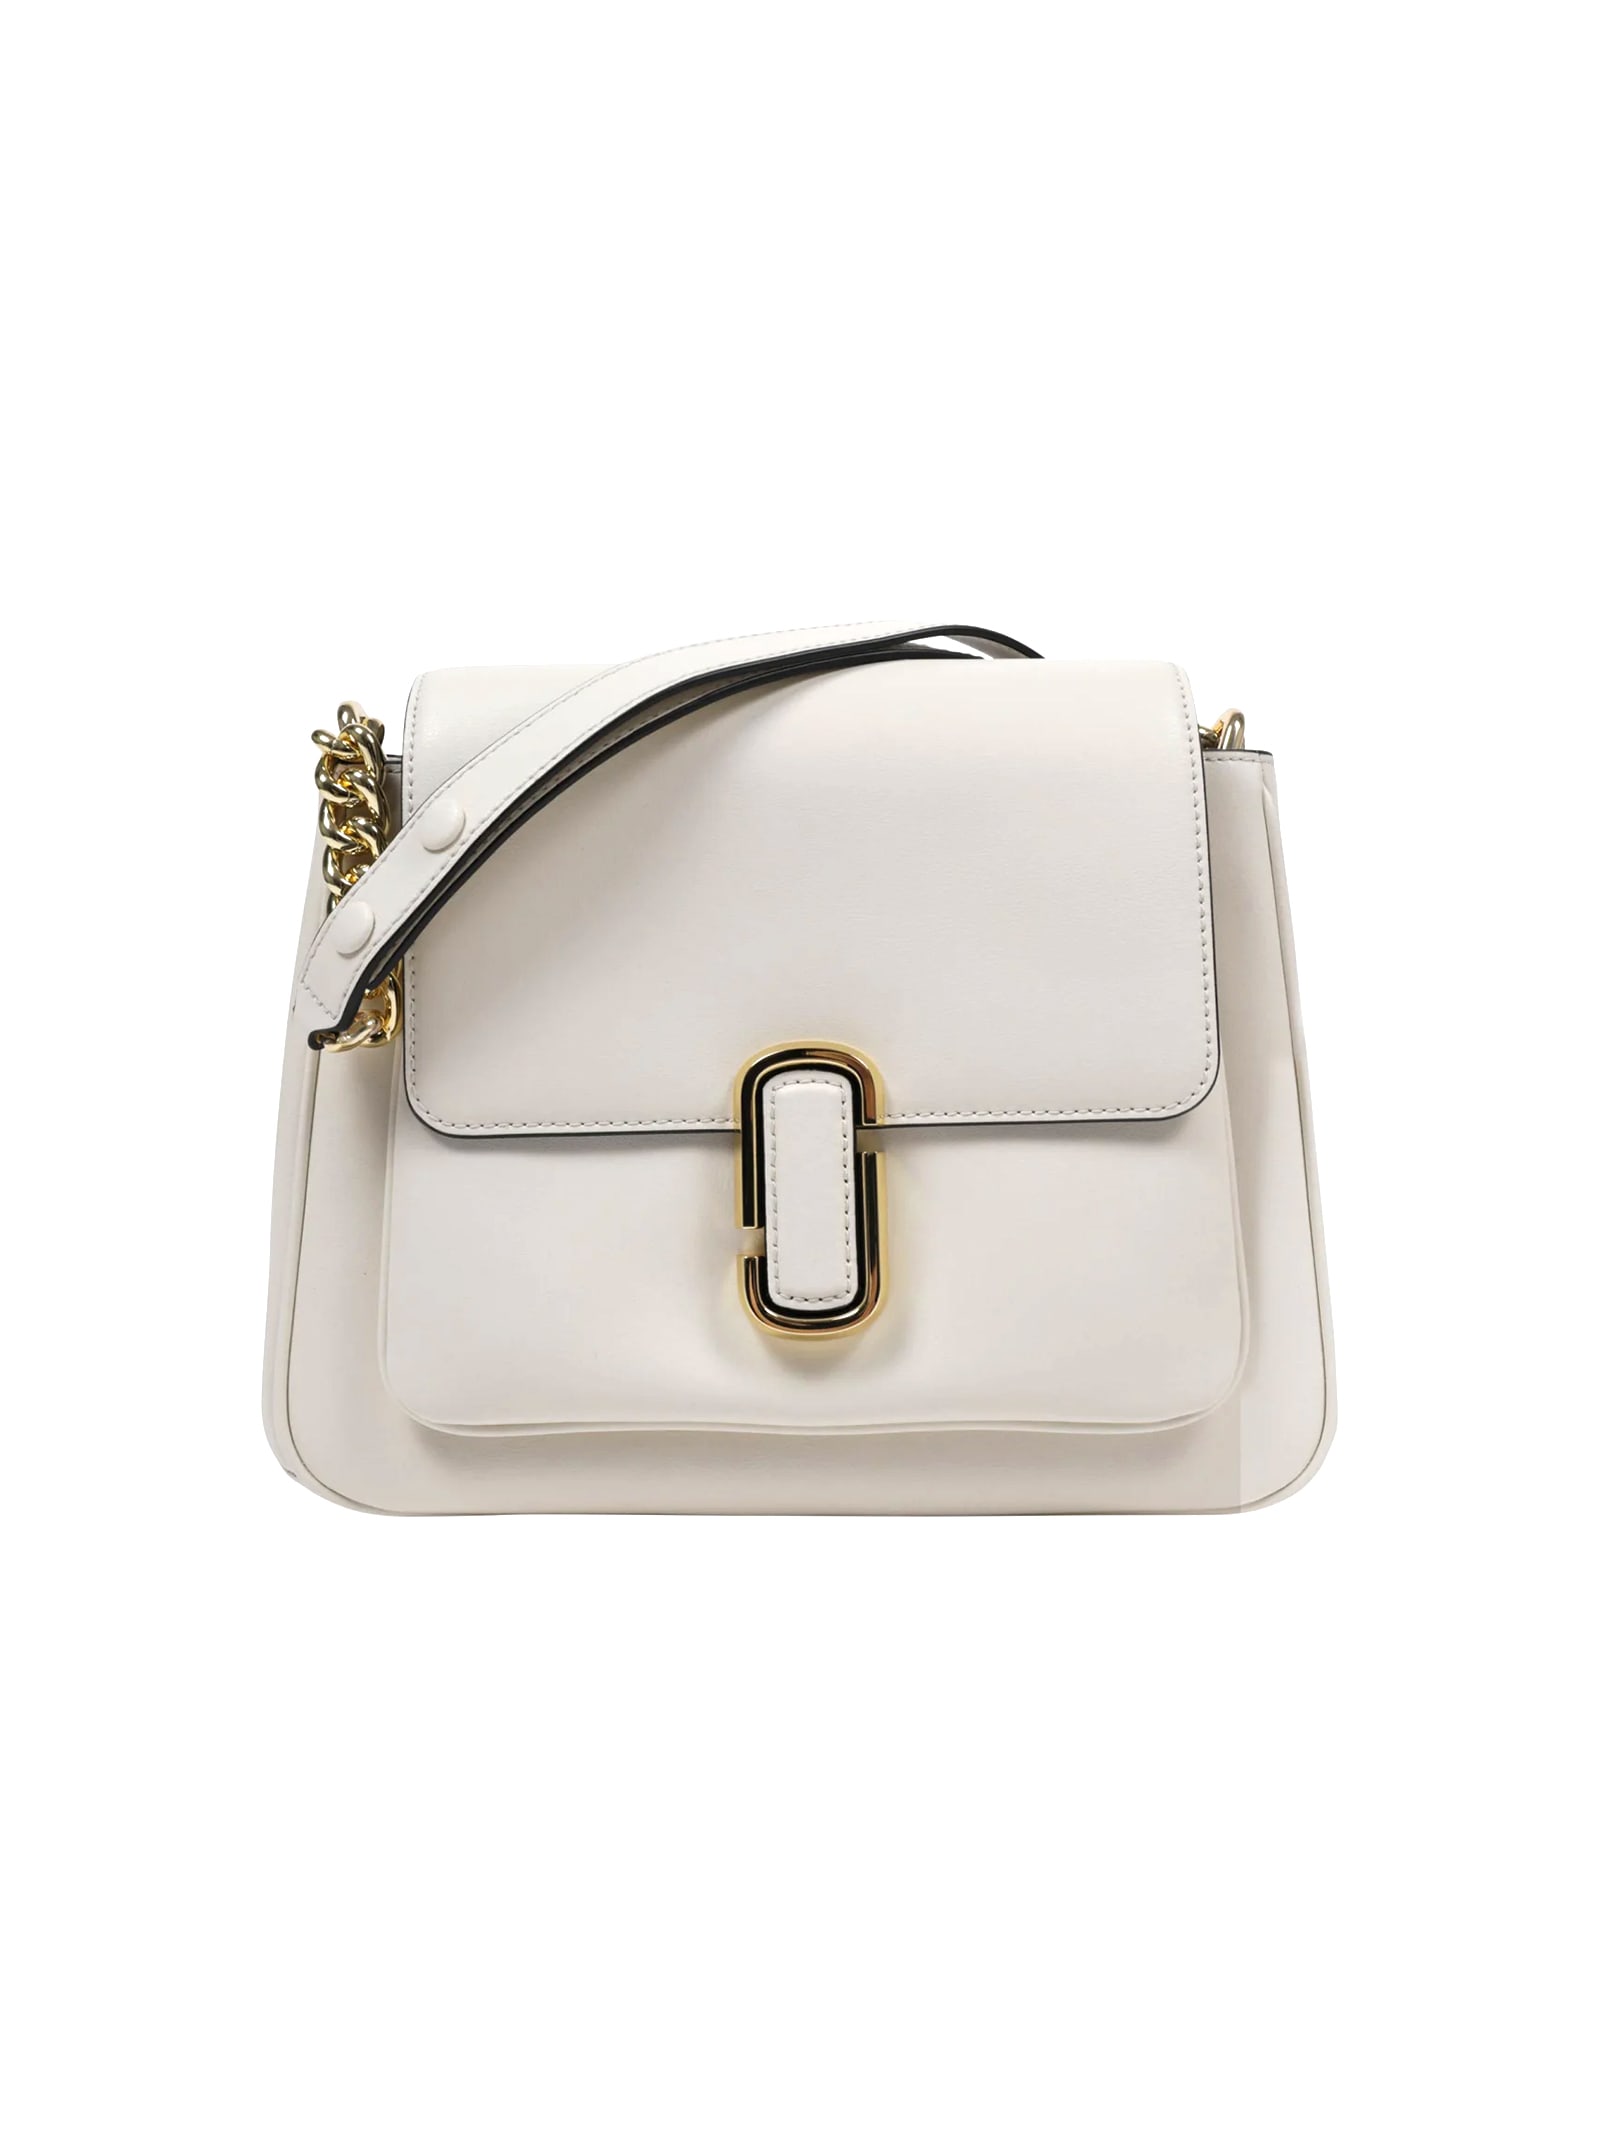 Marc Jacobs Chain Satchel Bag In White